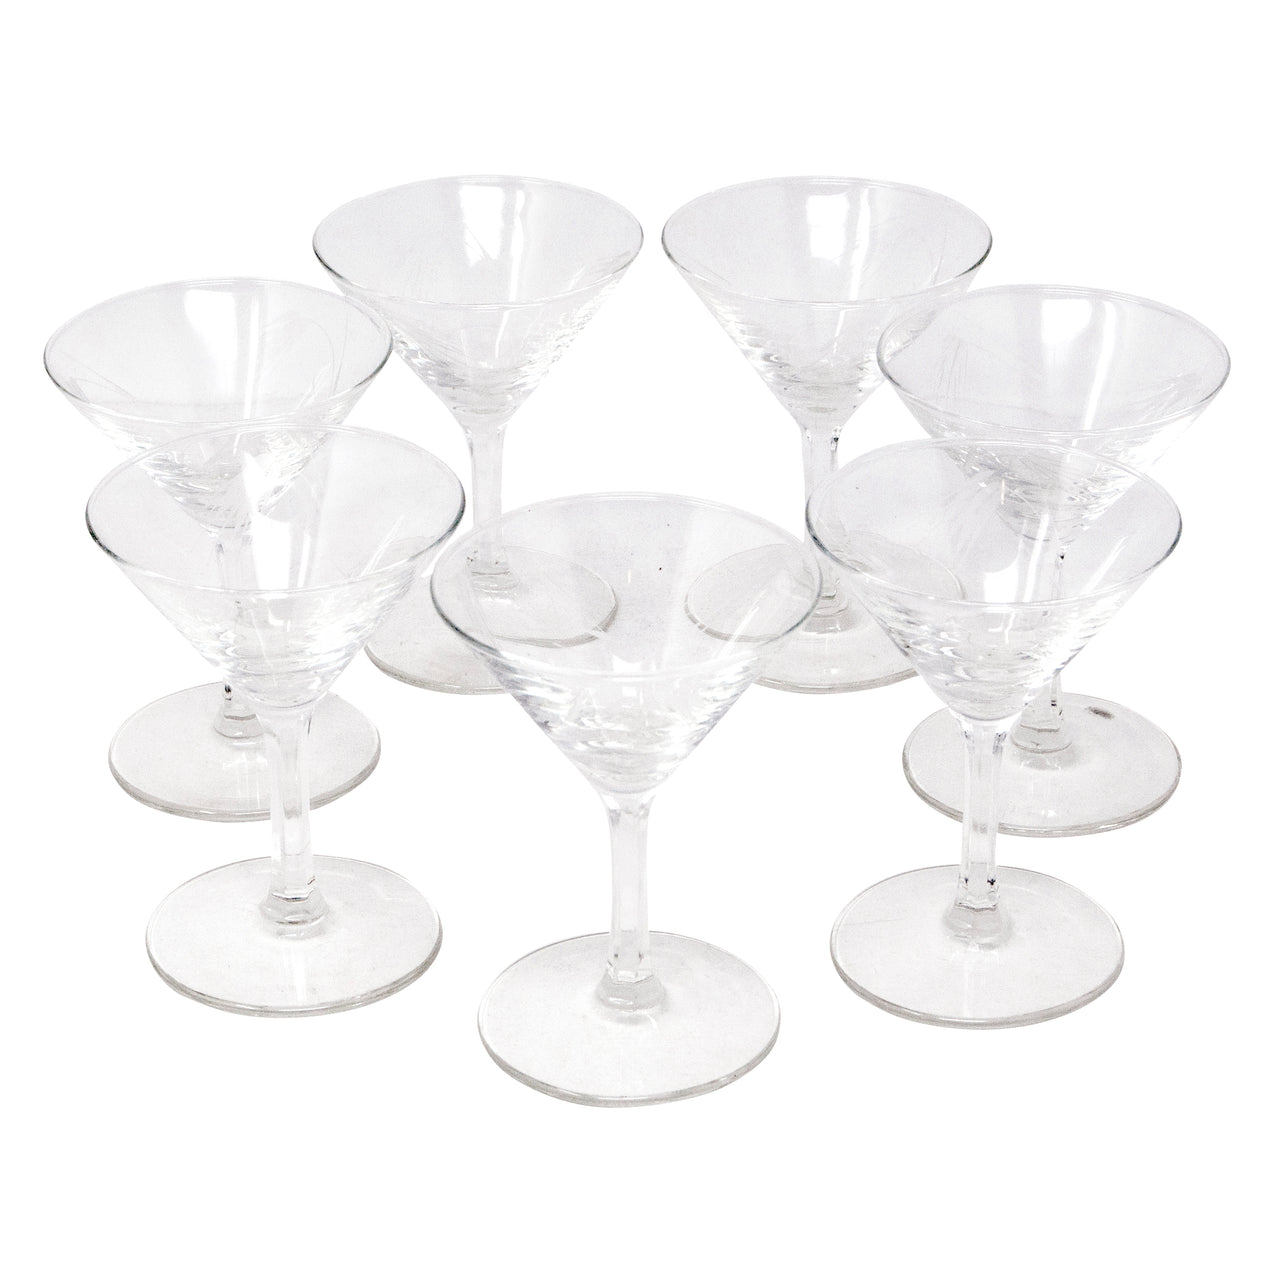 https://thehourshop.com/cdn/shop/products/23802-Vintage-Etched-Wheat-Clear-Martini-Glasses_1280x1280.jpg?v=1605042374